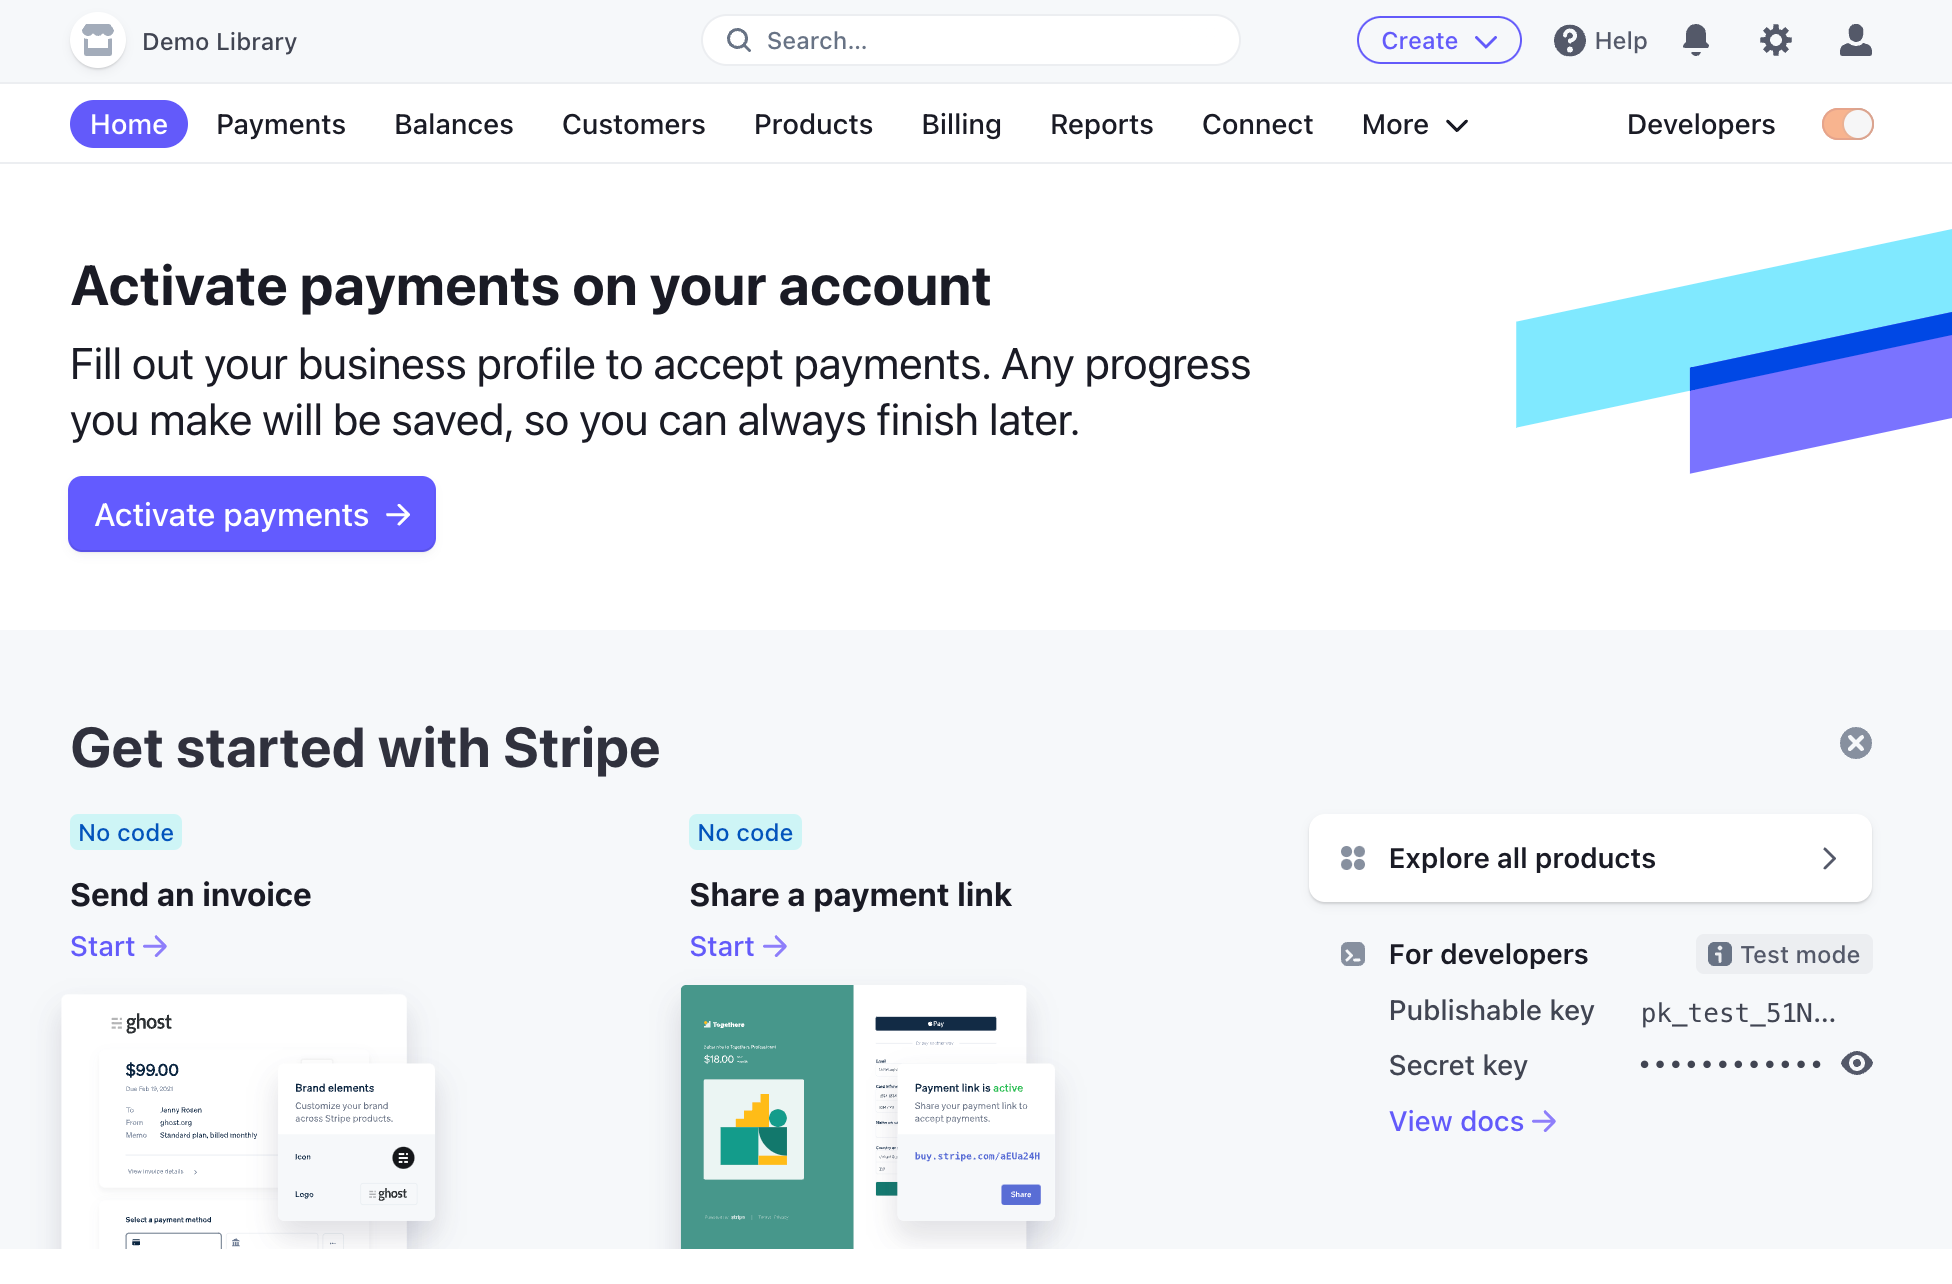 7 steps to setting up Stripe payments with Jumpstart Pro